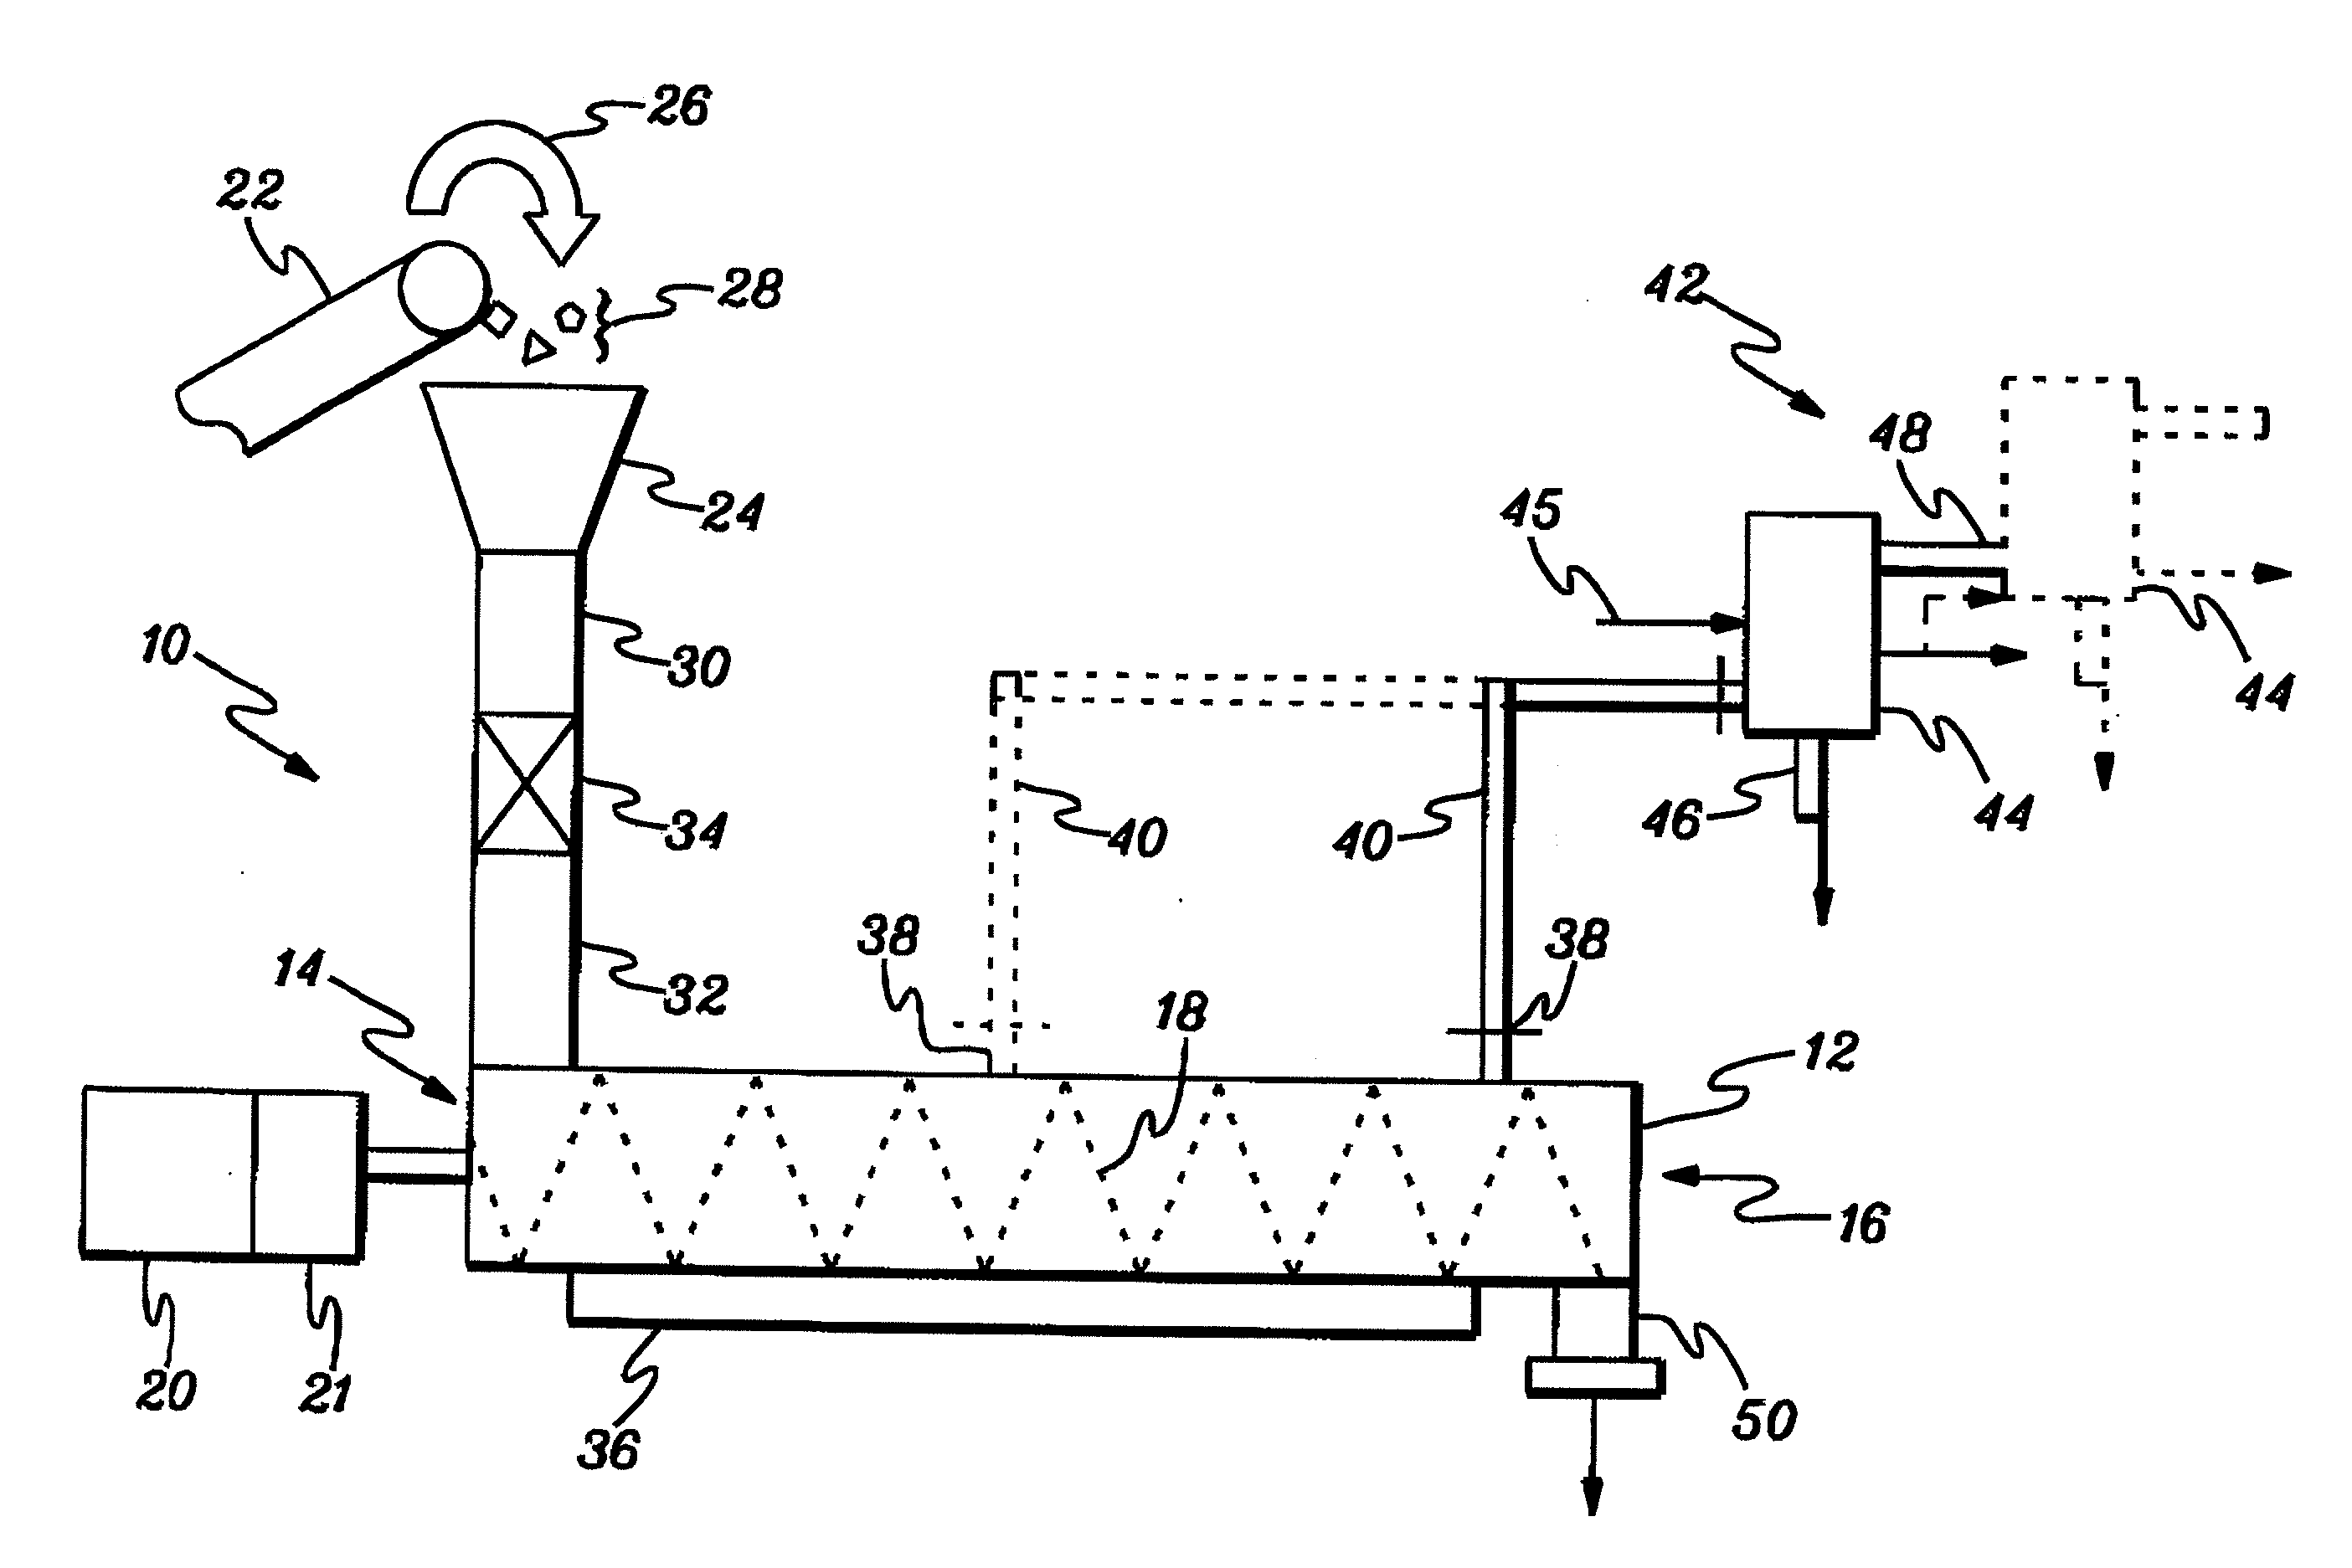 Methods and apparatus for pyrolyzing material